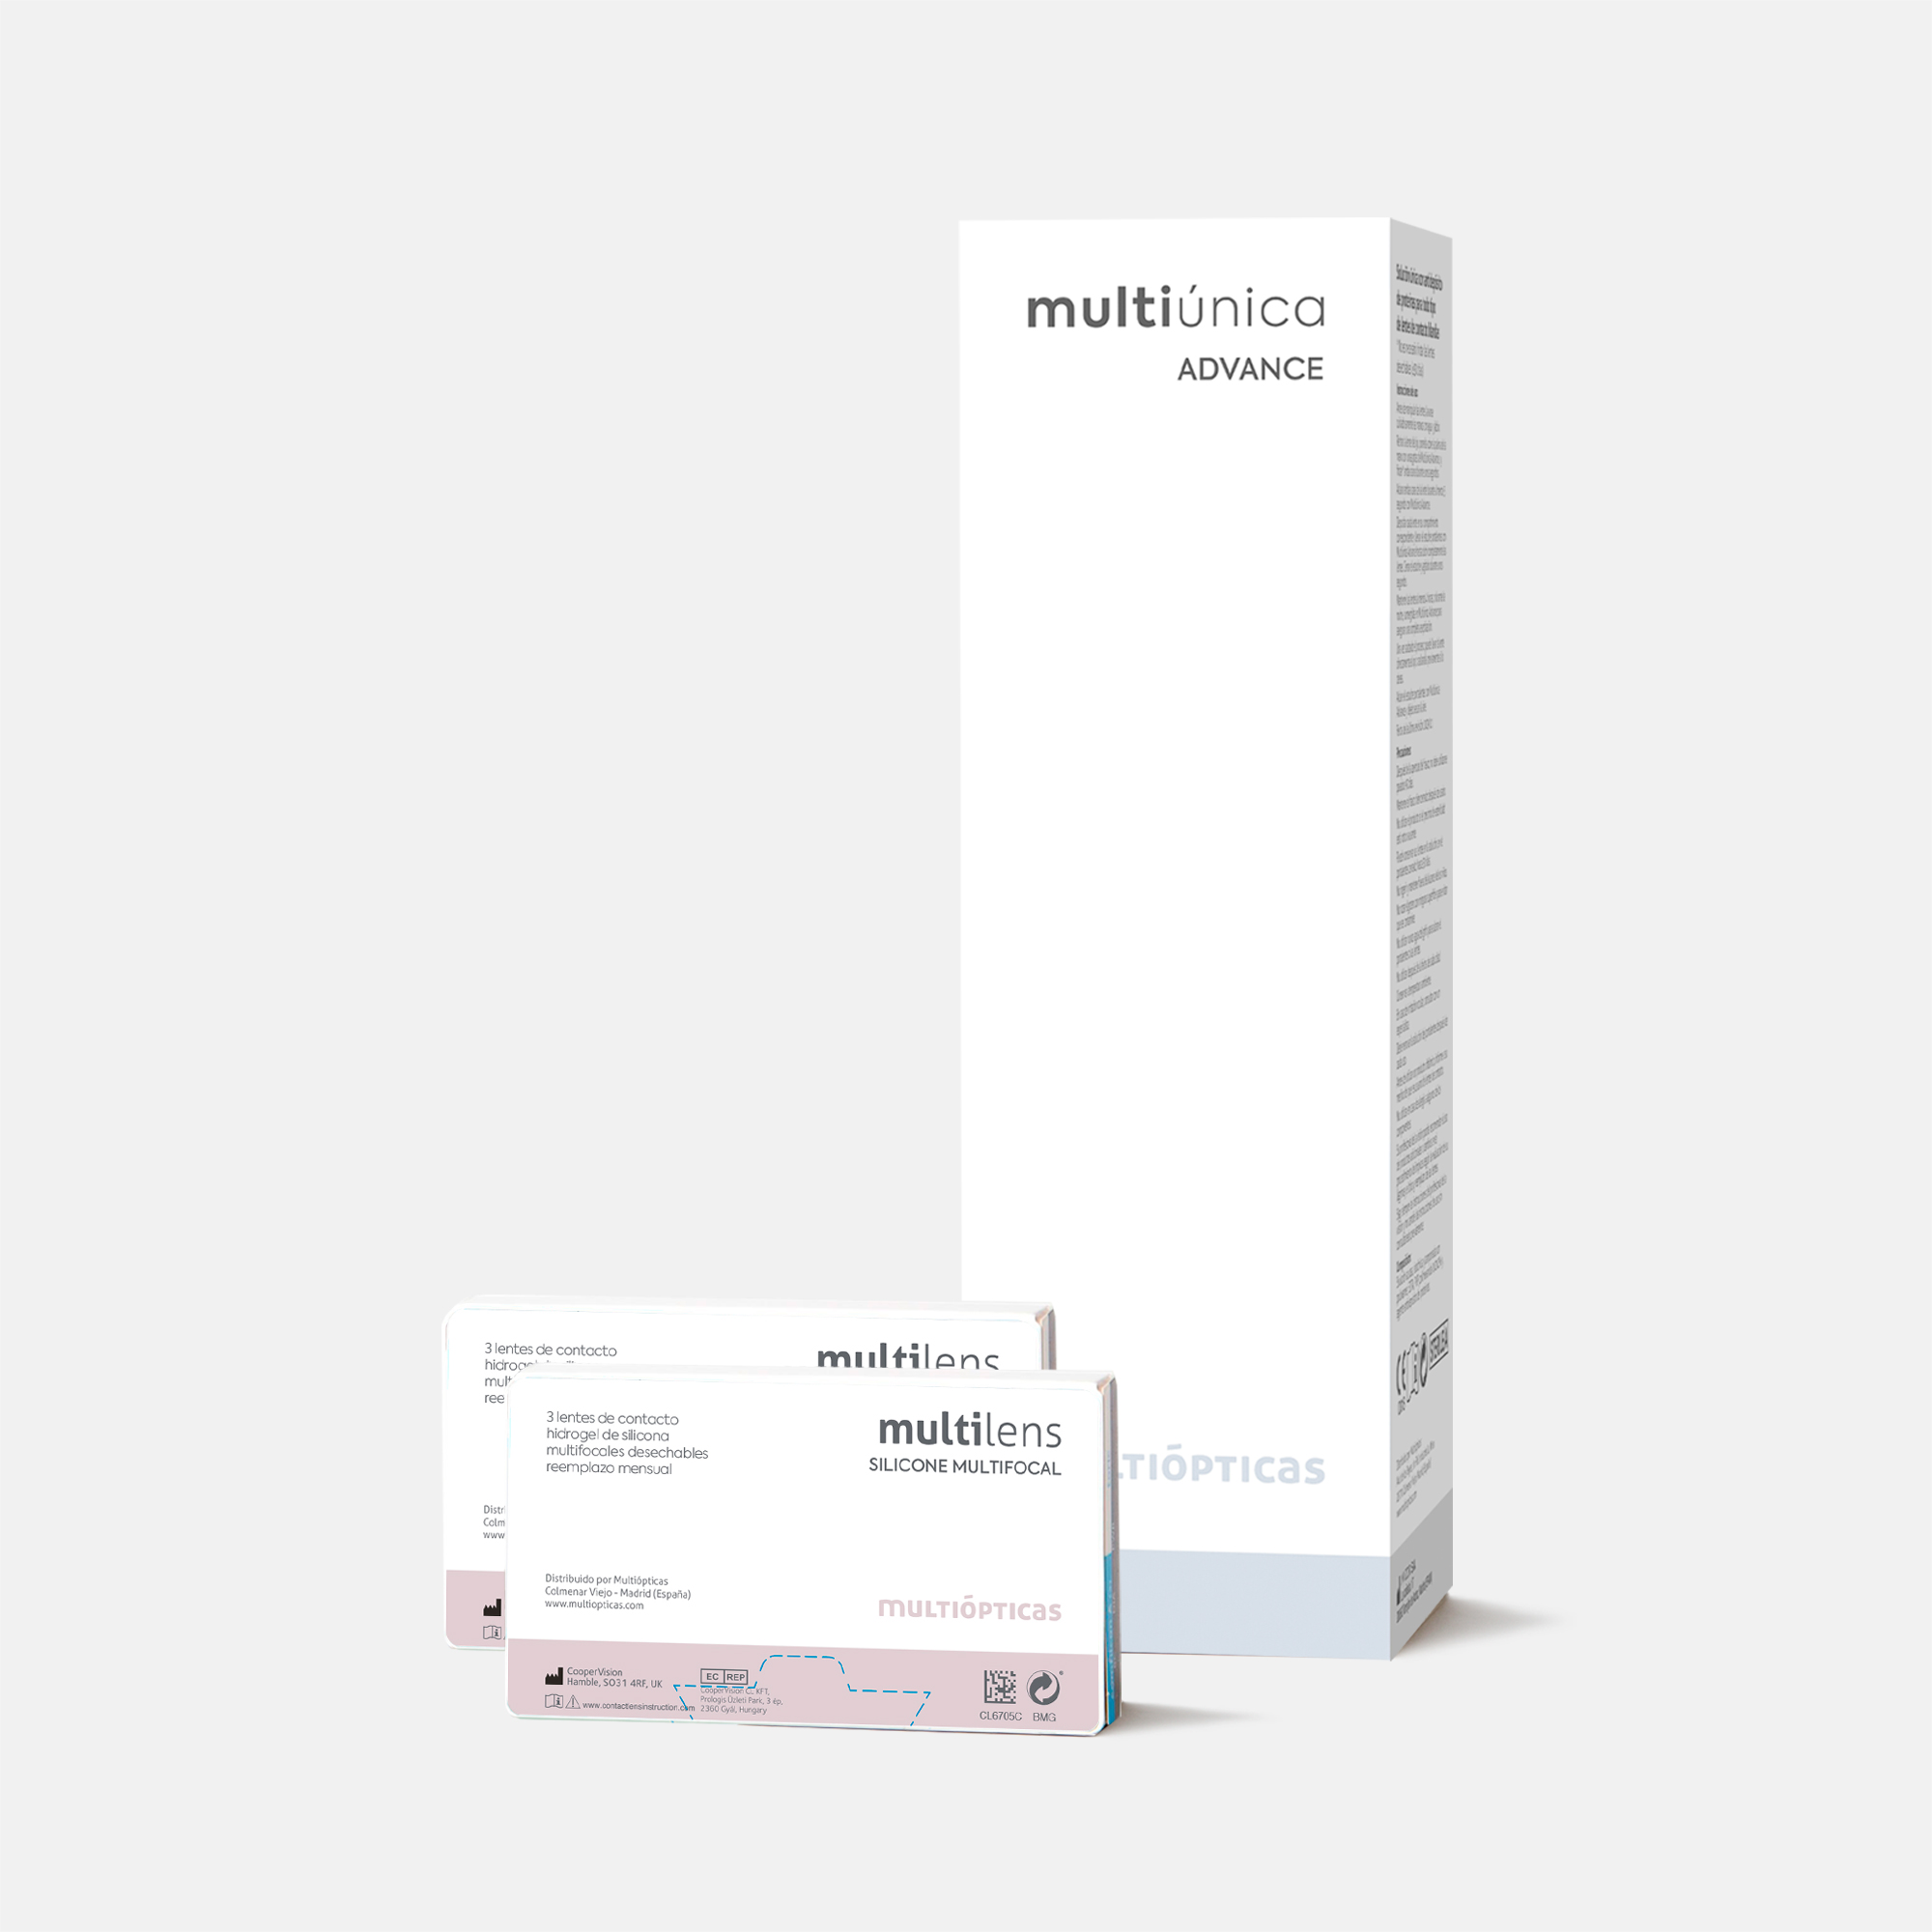 Pack trimestral multifocal silicone premium advance, , large.